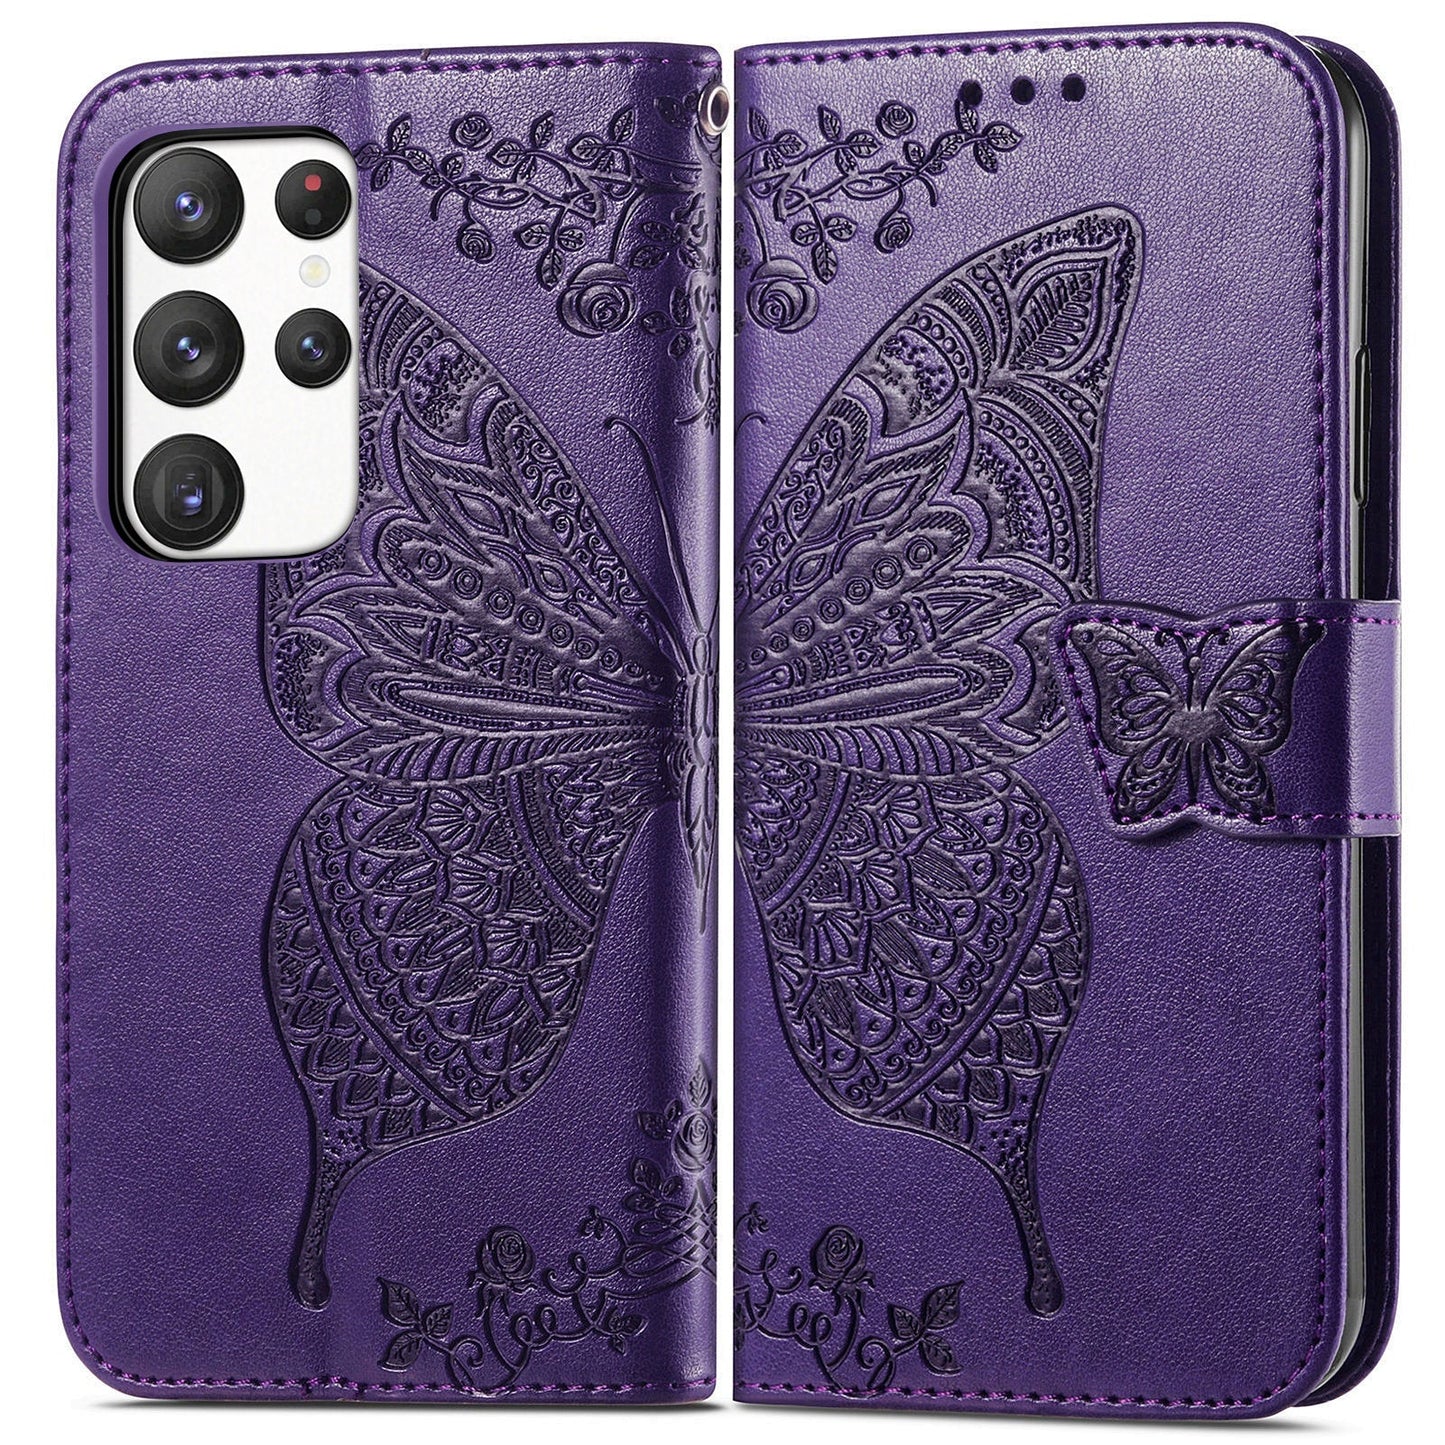 Embossed Butterfly Wallet Flip Case For Samsung Galaxy Series 2019